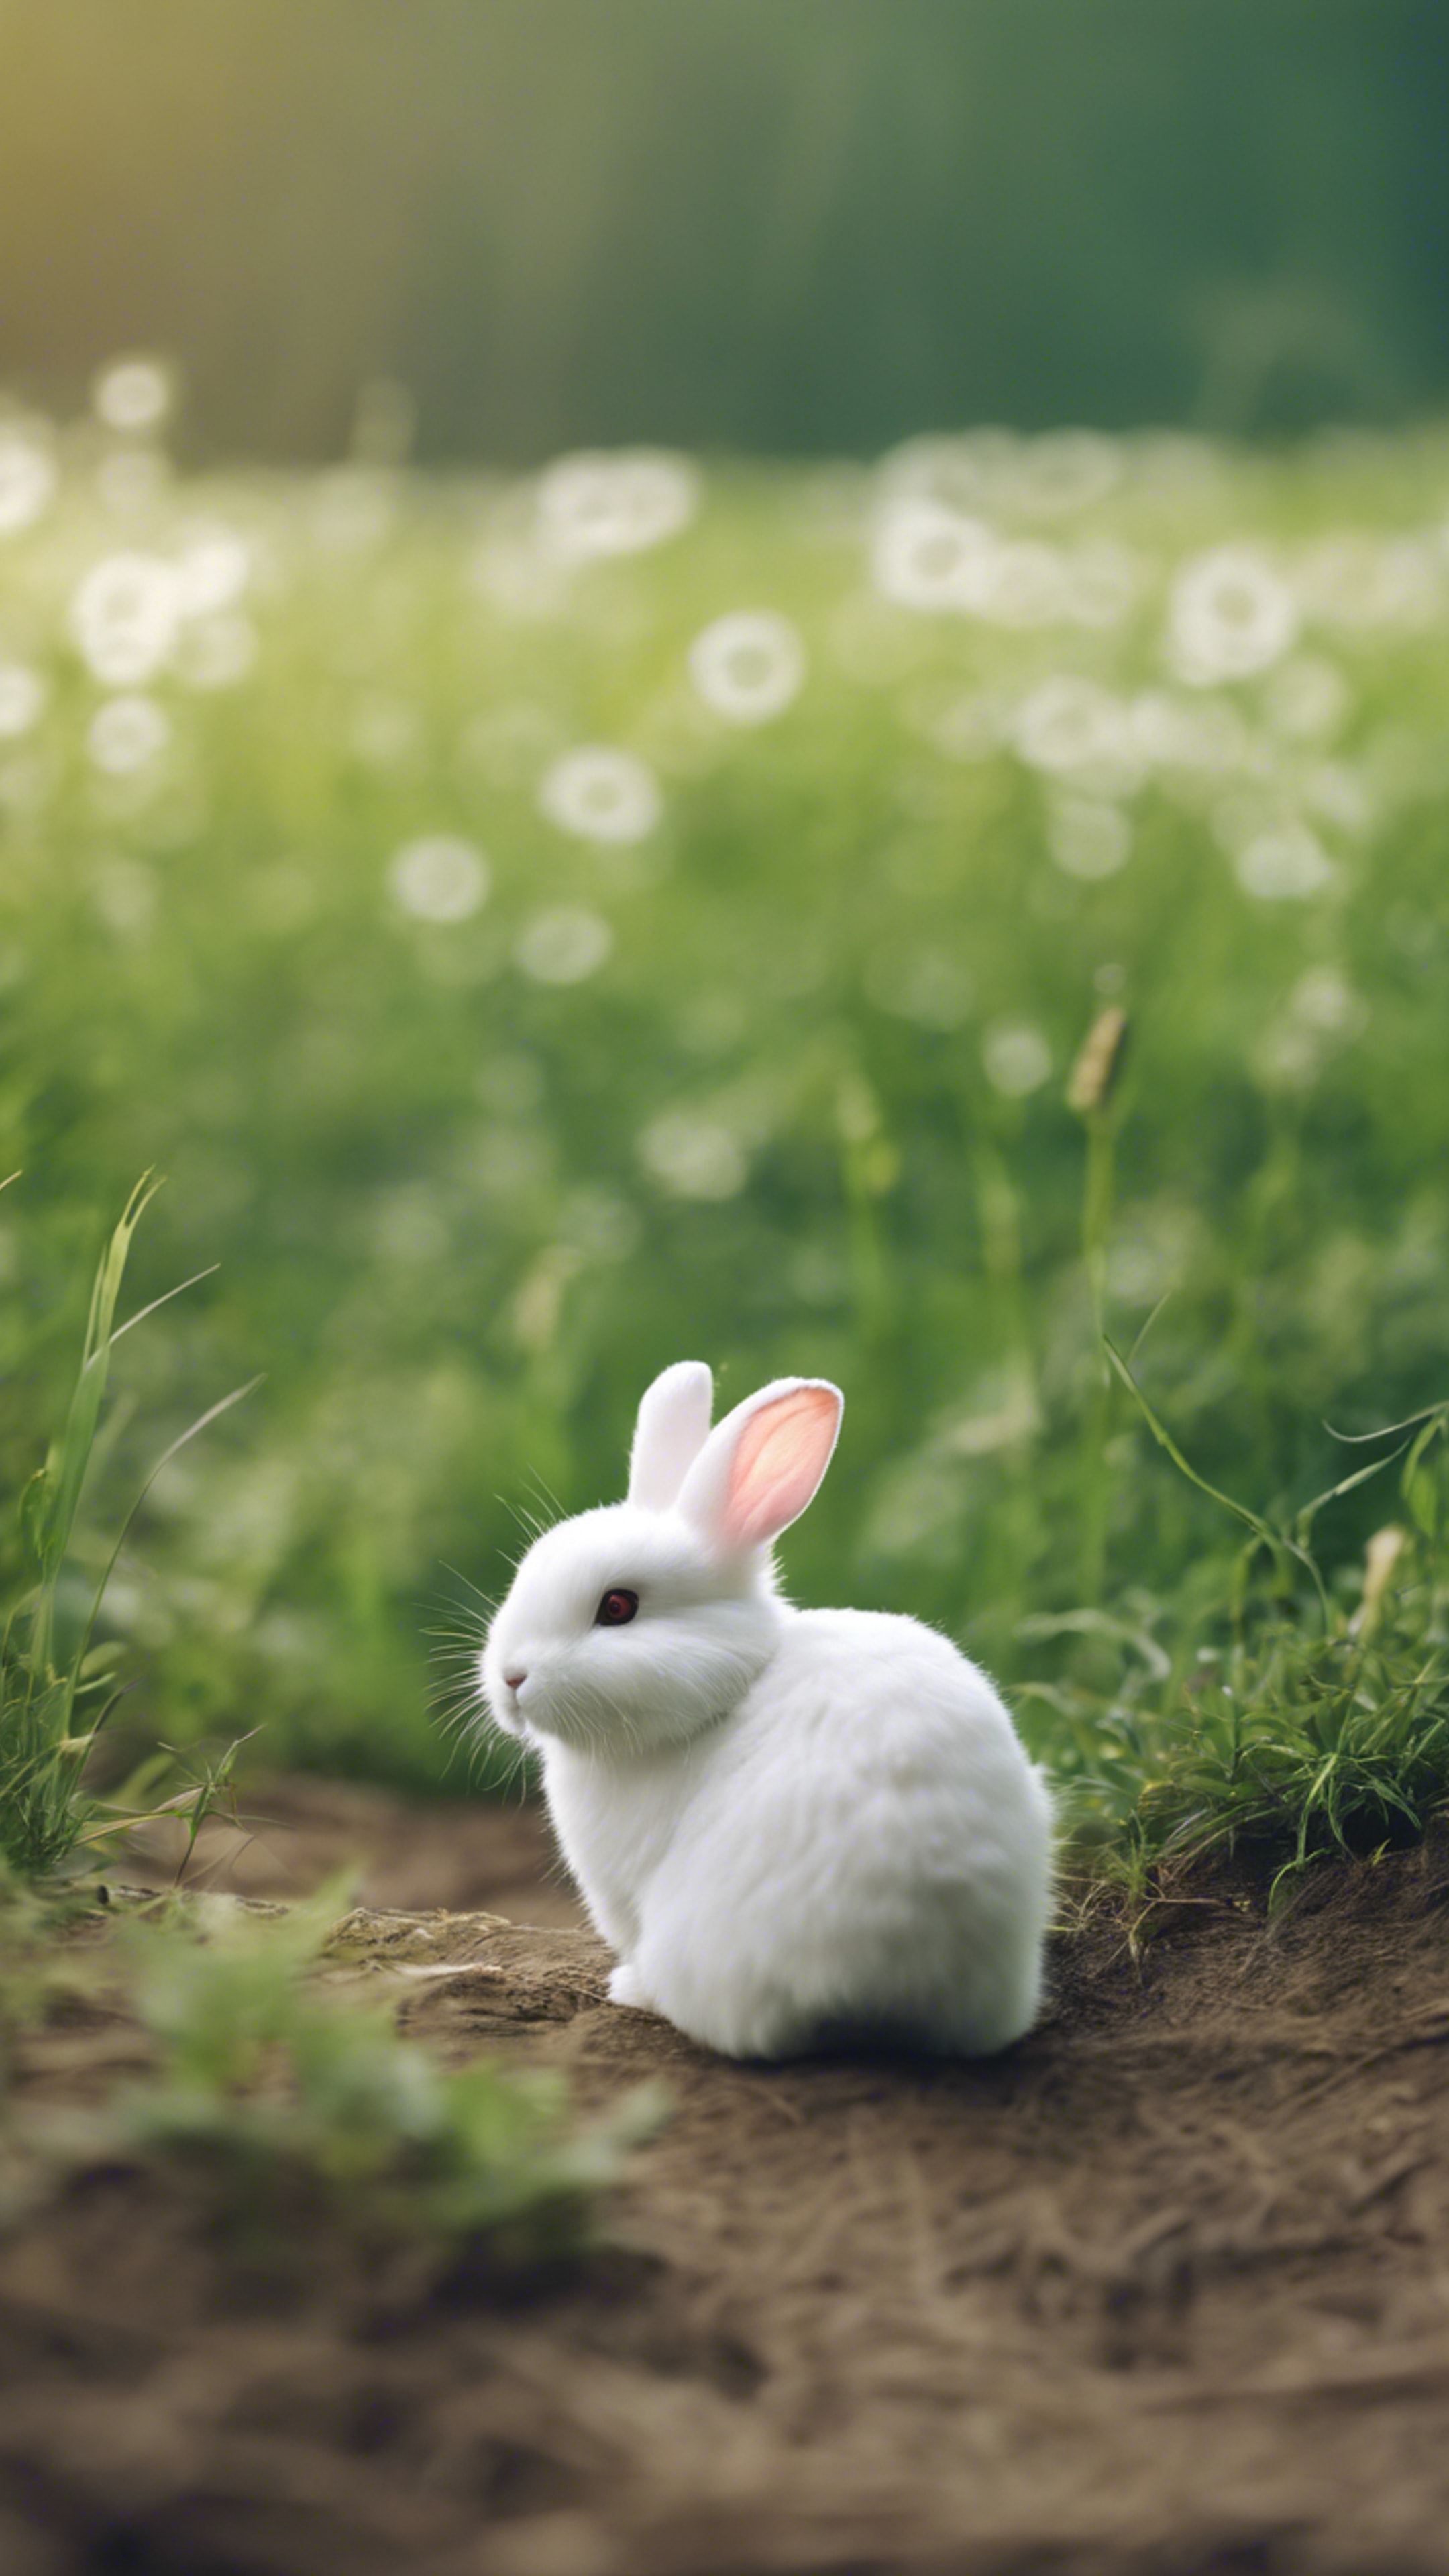 A kawaii white rabbit on a green field, fluffy tail flickering in the wind. Tapet[1912d35368704584b61e]